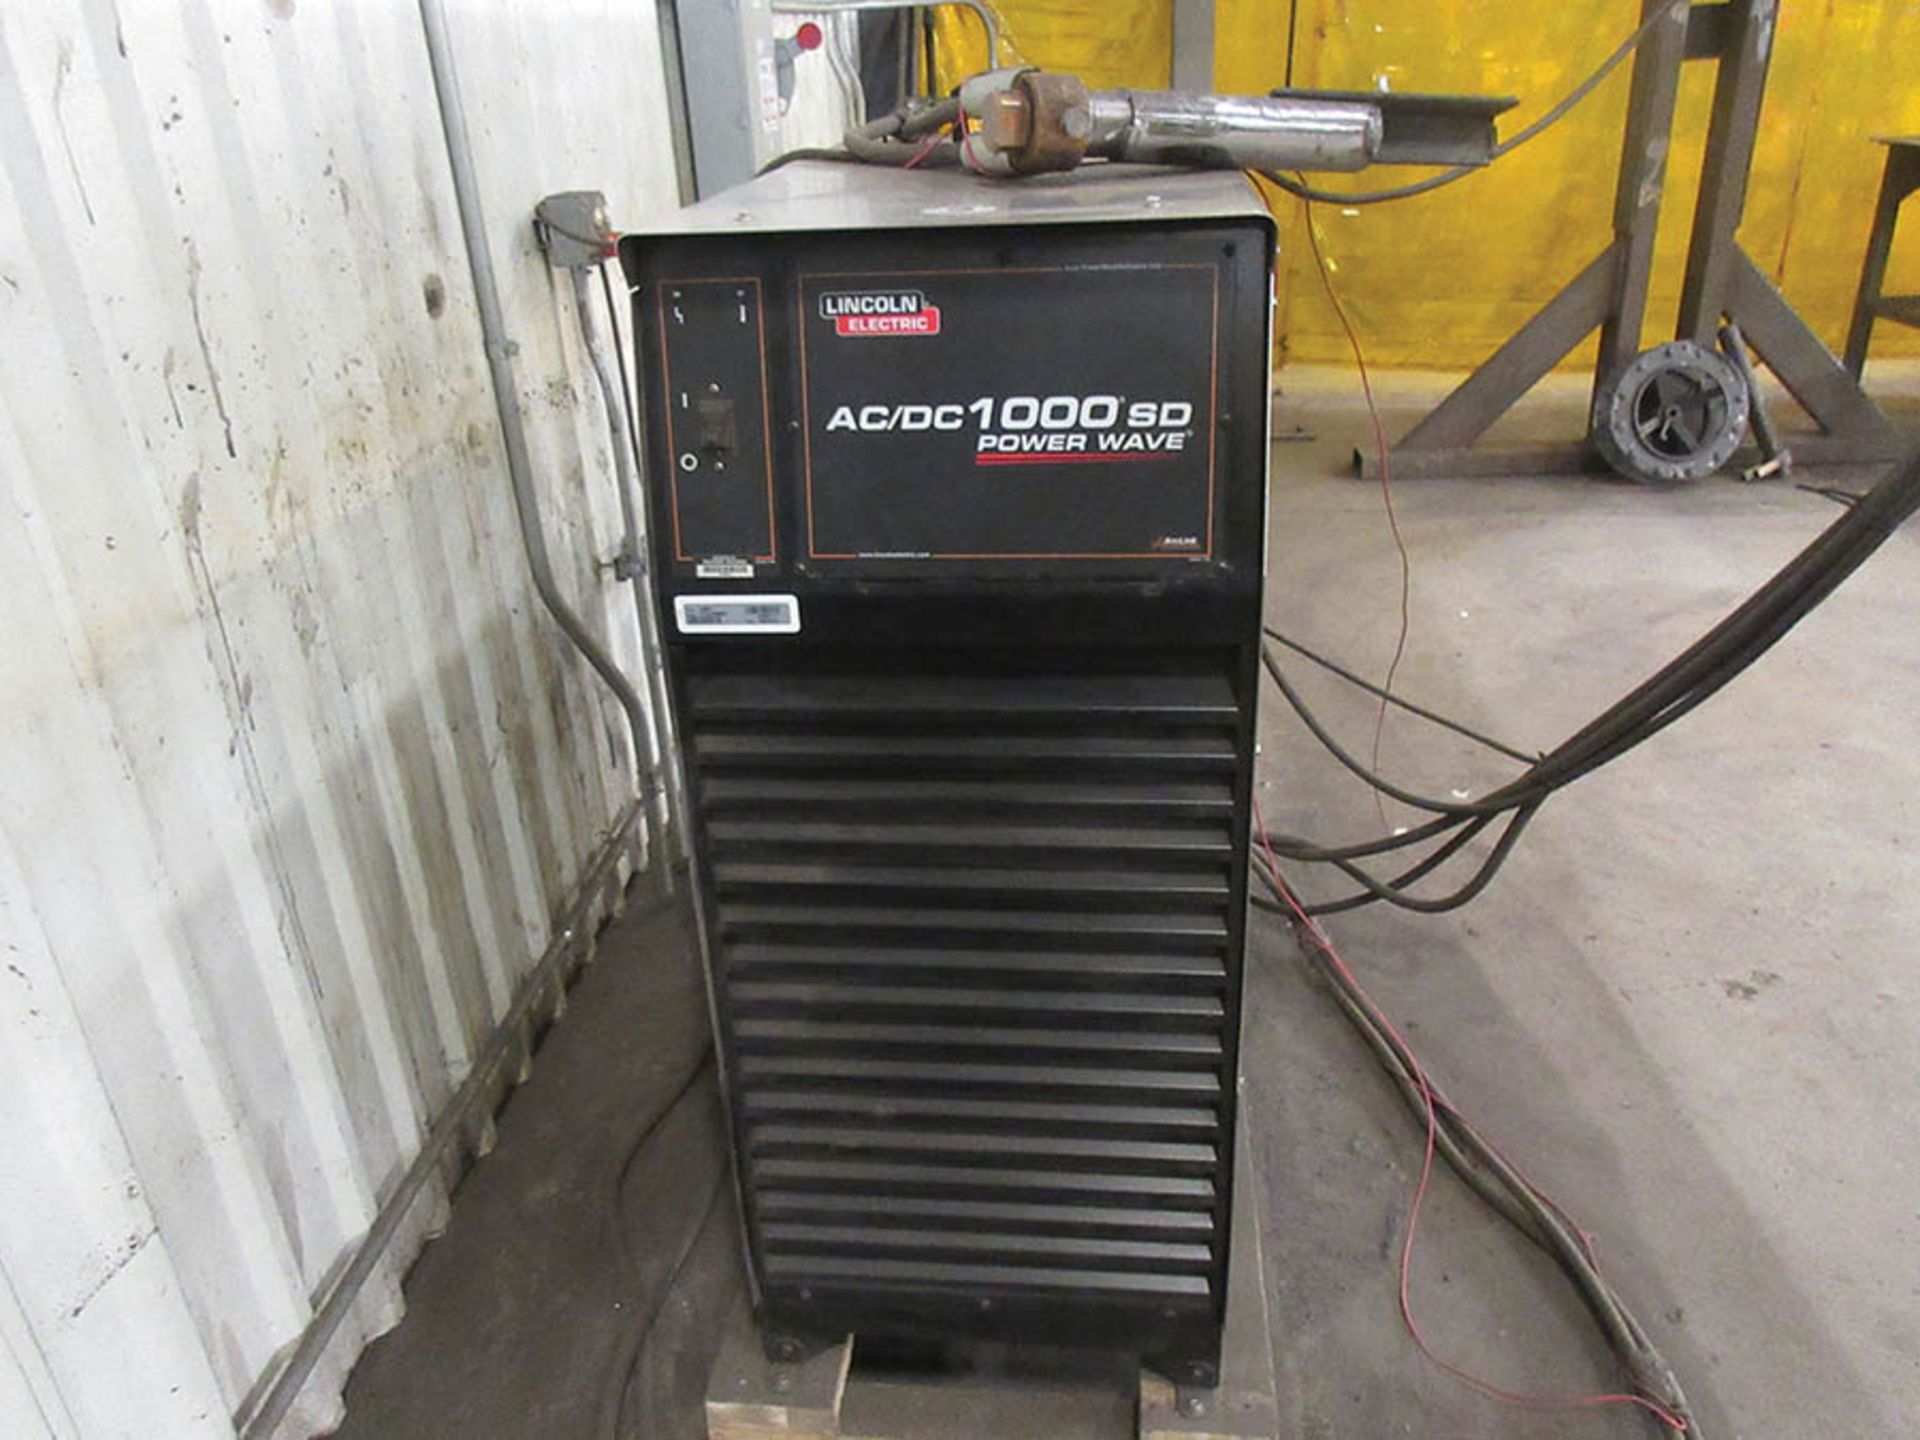 SUB-ARC WELDING STATION, WITH LINCOLN ELECTRIC POWER WAVE AC/DC 1000 SD SUBARC WELDERS, S/N: - Image 2 of 7